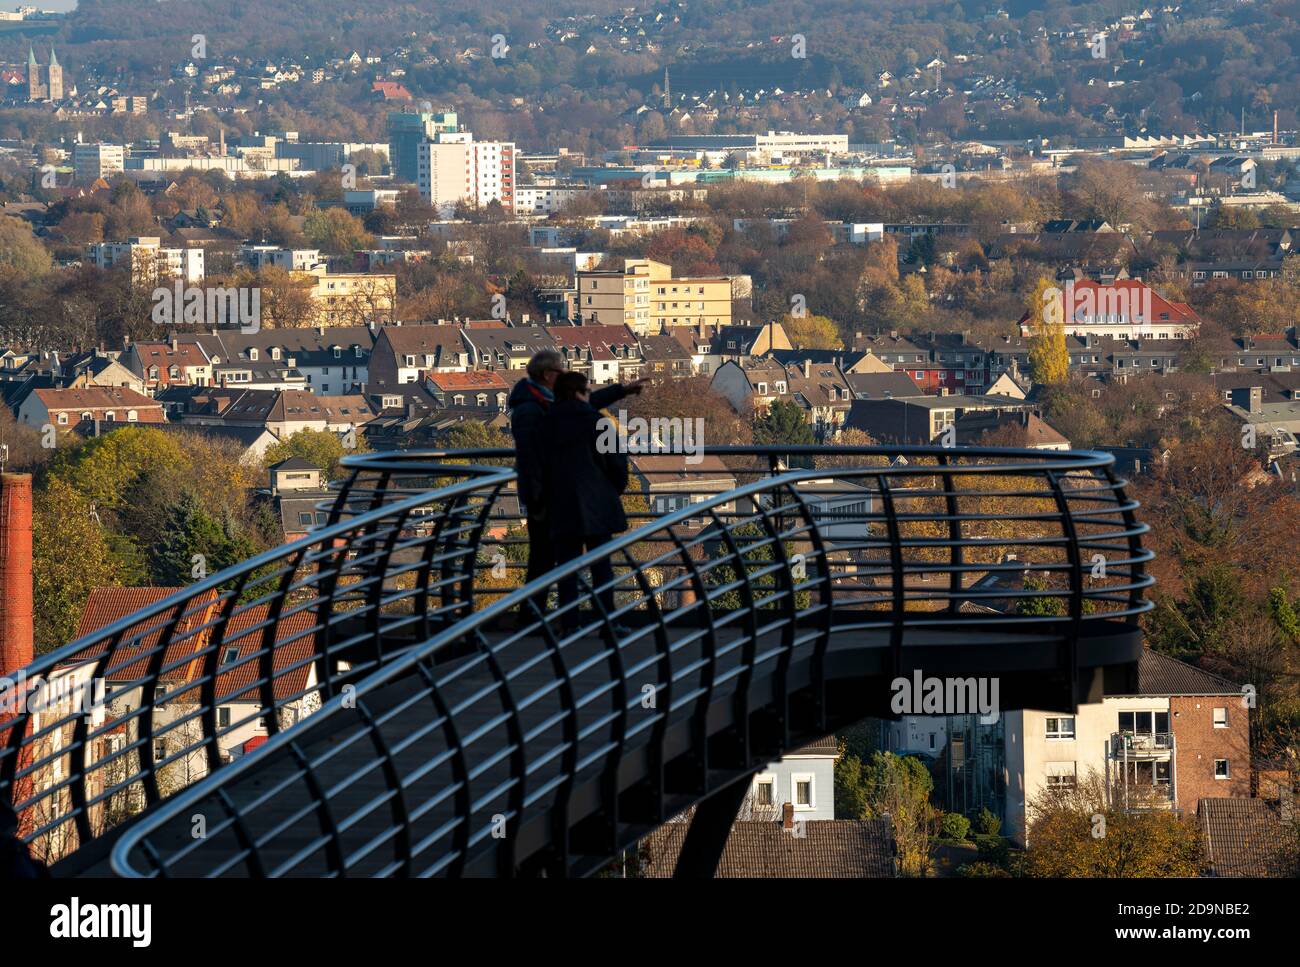 The Nordpark in Wuppertal, viewing platform Skywalk, view over the districts of Barmen and Oberbarmen, Wuppertal, NRW, Germany Stock Photo